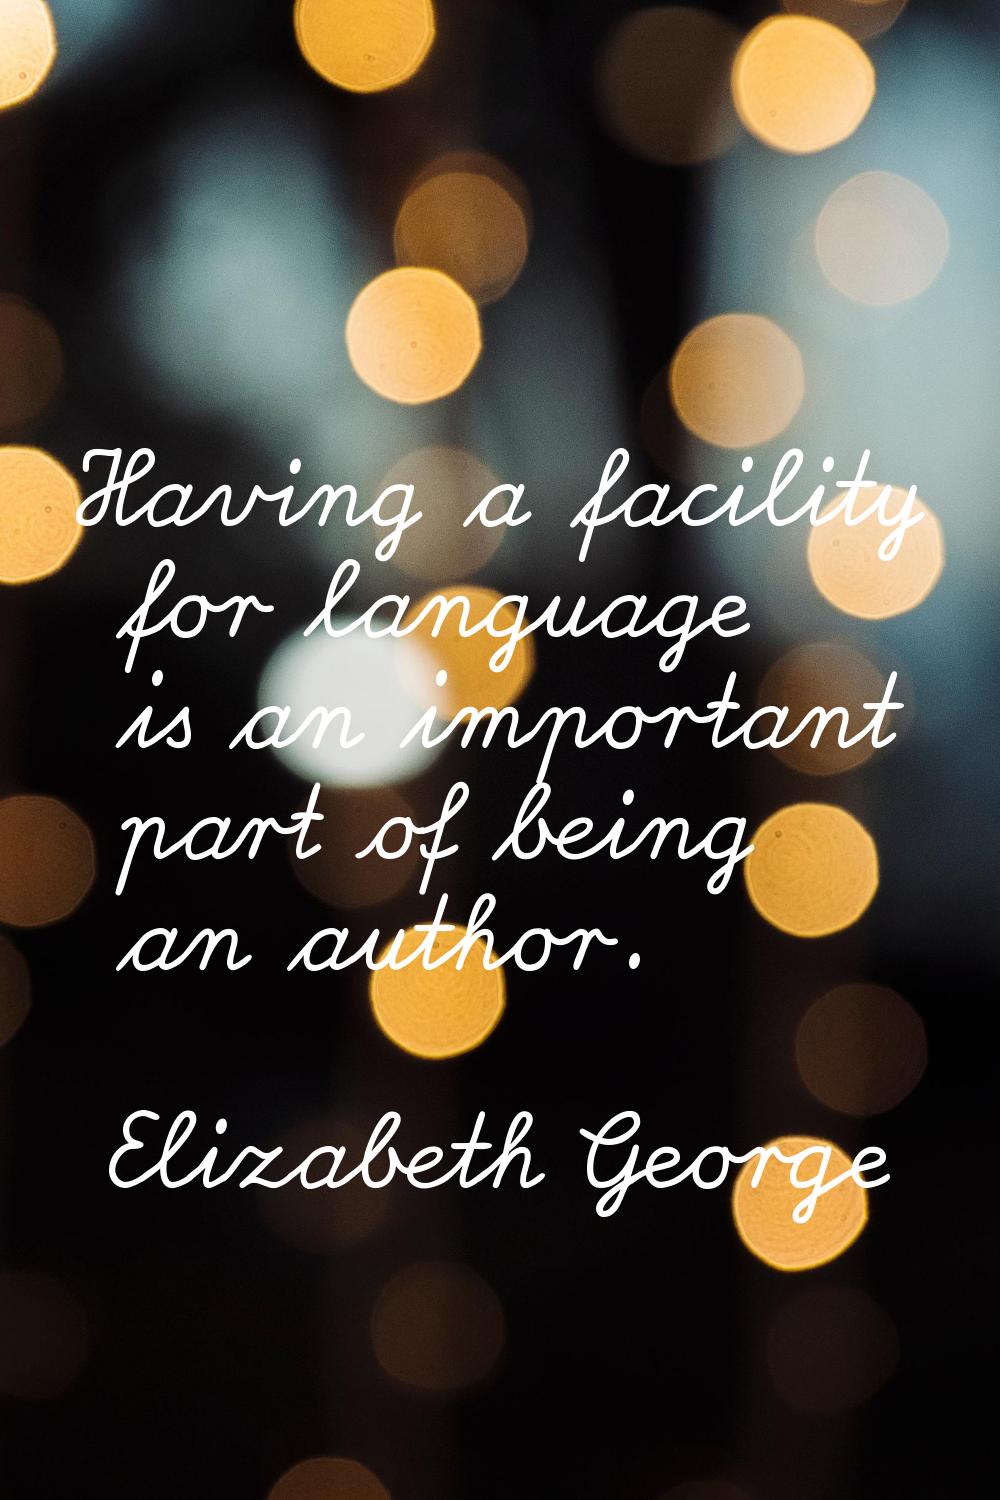 Having a facility for language is an important part of being an author.